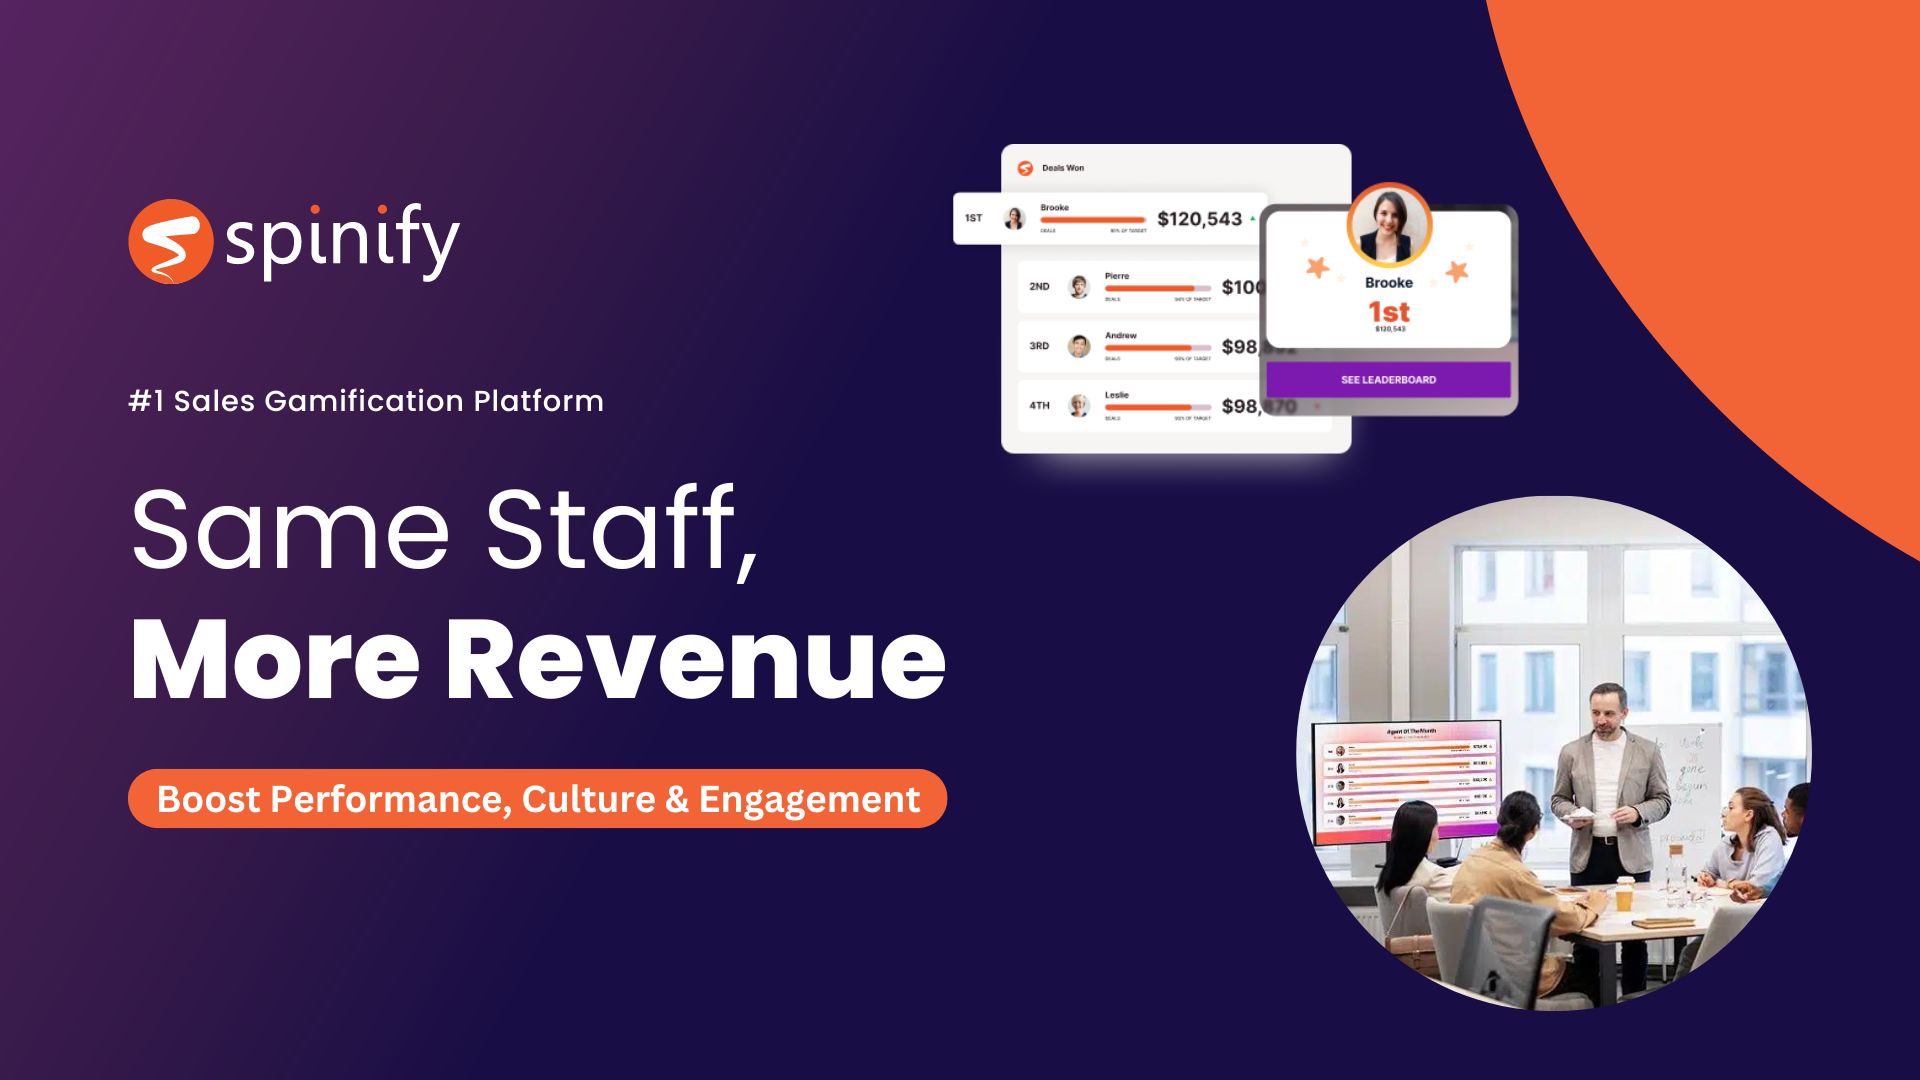 Level up motivation, results, and incentives with Spinify - Book your personalized demo today!